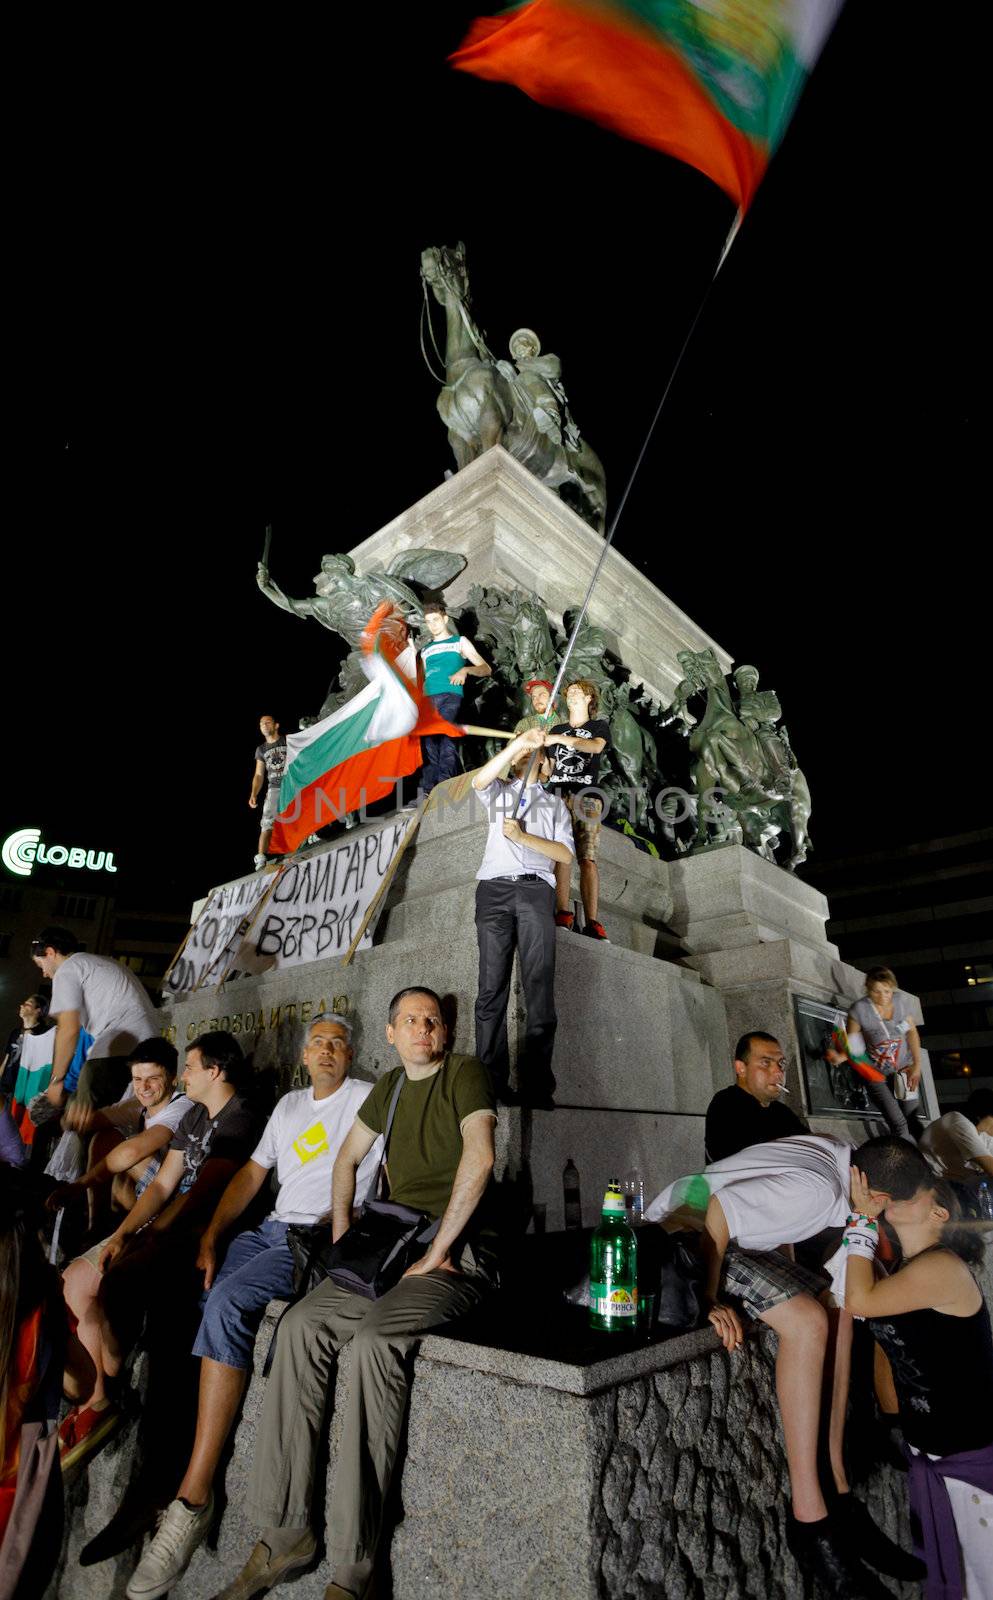 Sofia; Bulgaria - June 18, 2013: Bulgarians are protesting infront of the parliament, climbed on "King the liberator" monument, demanding their newly appointed socialist government step down.
The protests were originally sparked by the controversial appointment of businessman and MP Delyan Peevski as the new head of the State Agency for National Security.